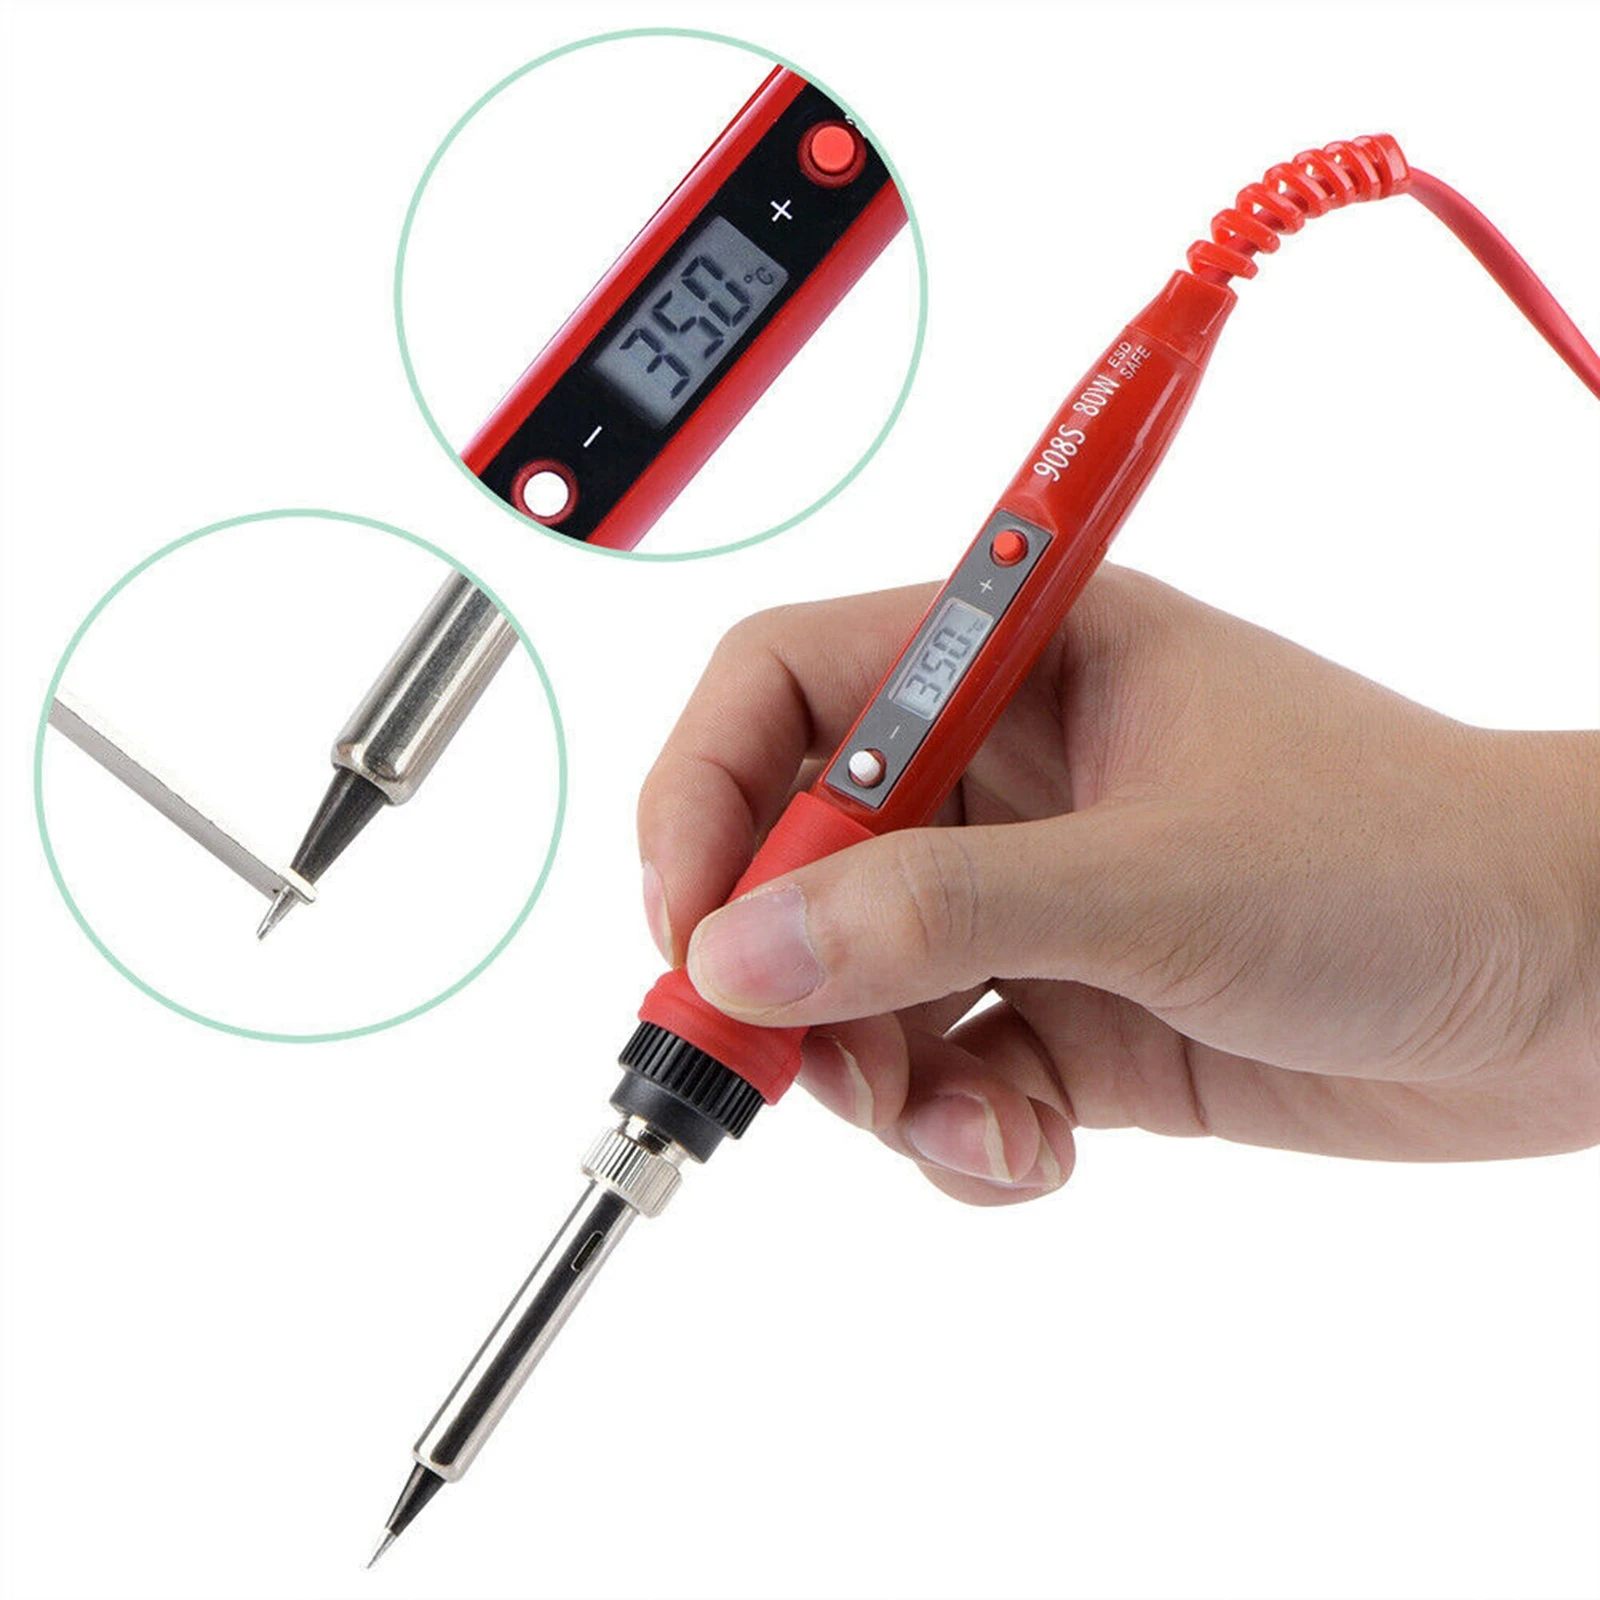 80W 220V LCD Display Electric Soldering Iron Kit Digital Solder Gun with Thermostitc, 1.4 meters Cable, EU Type